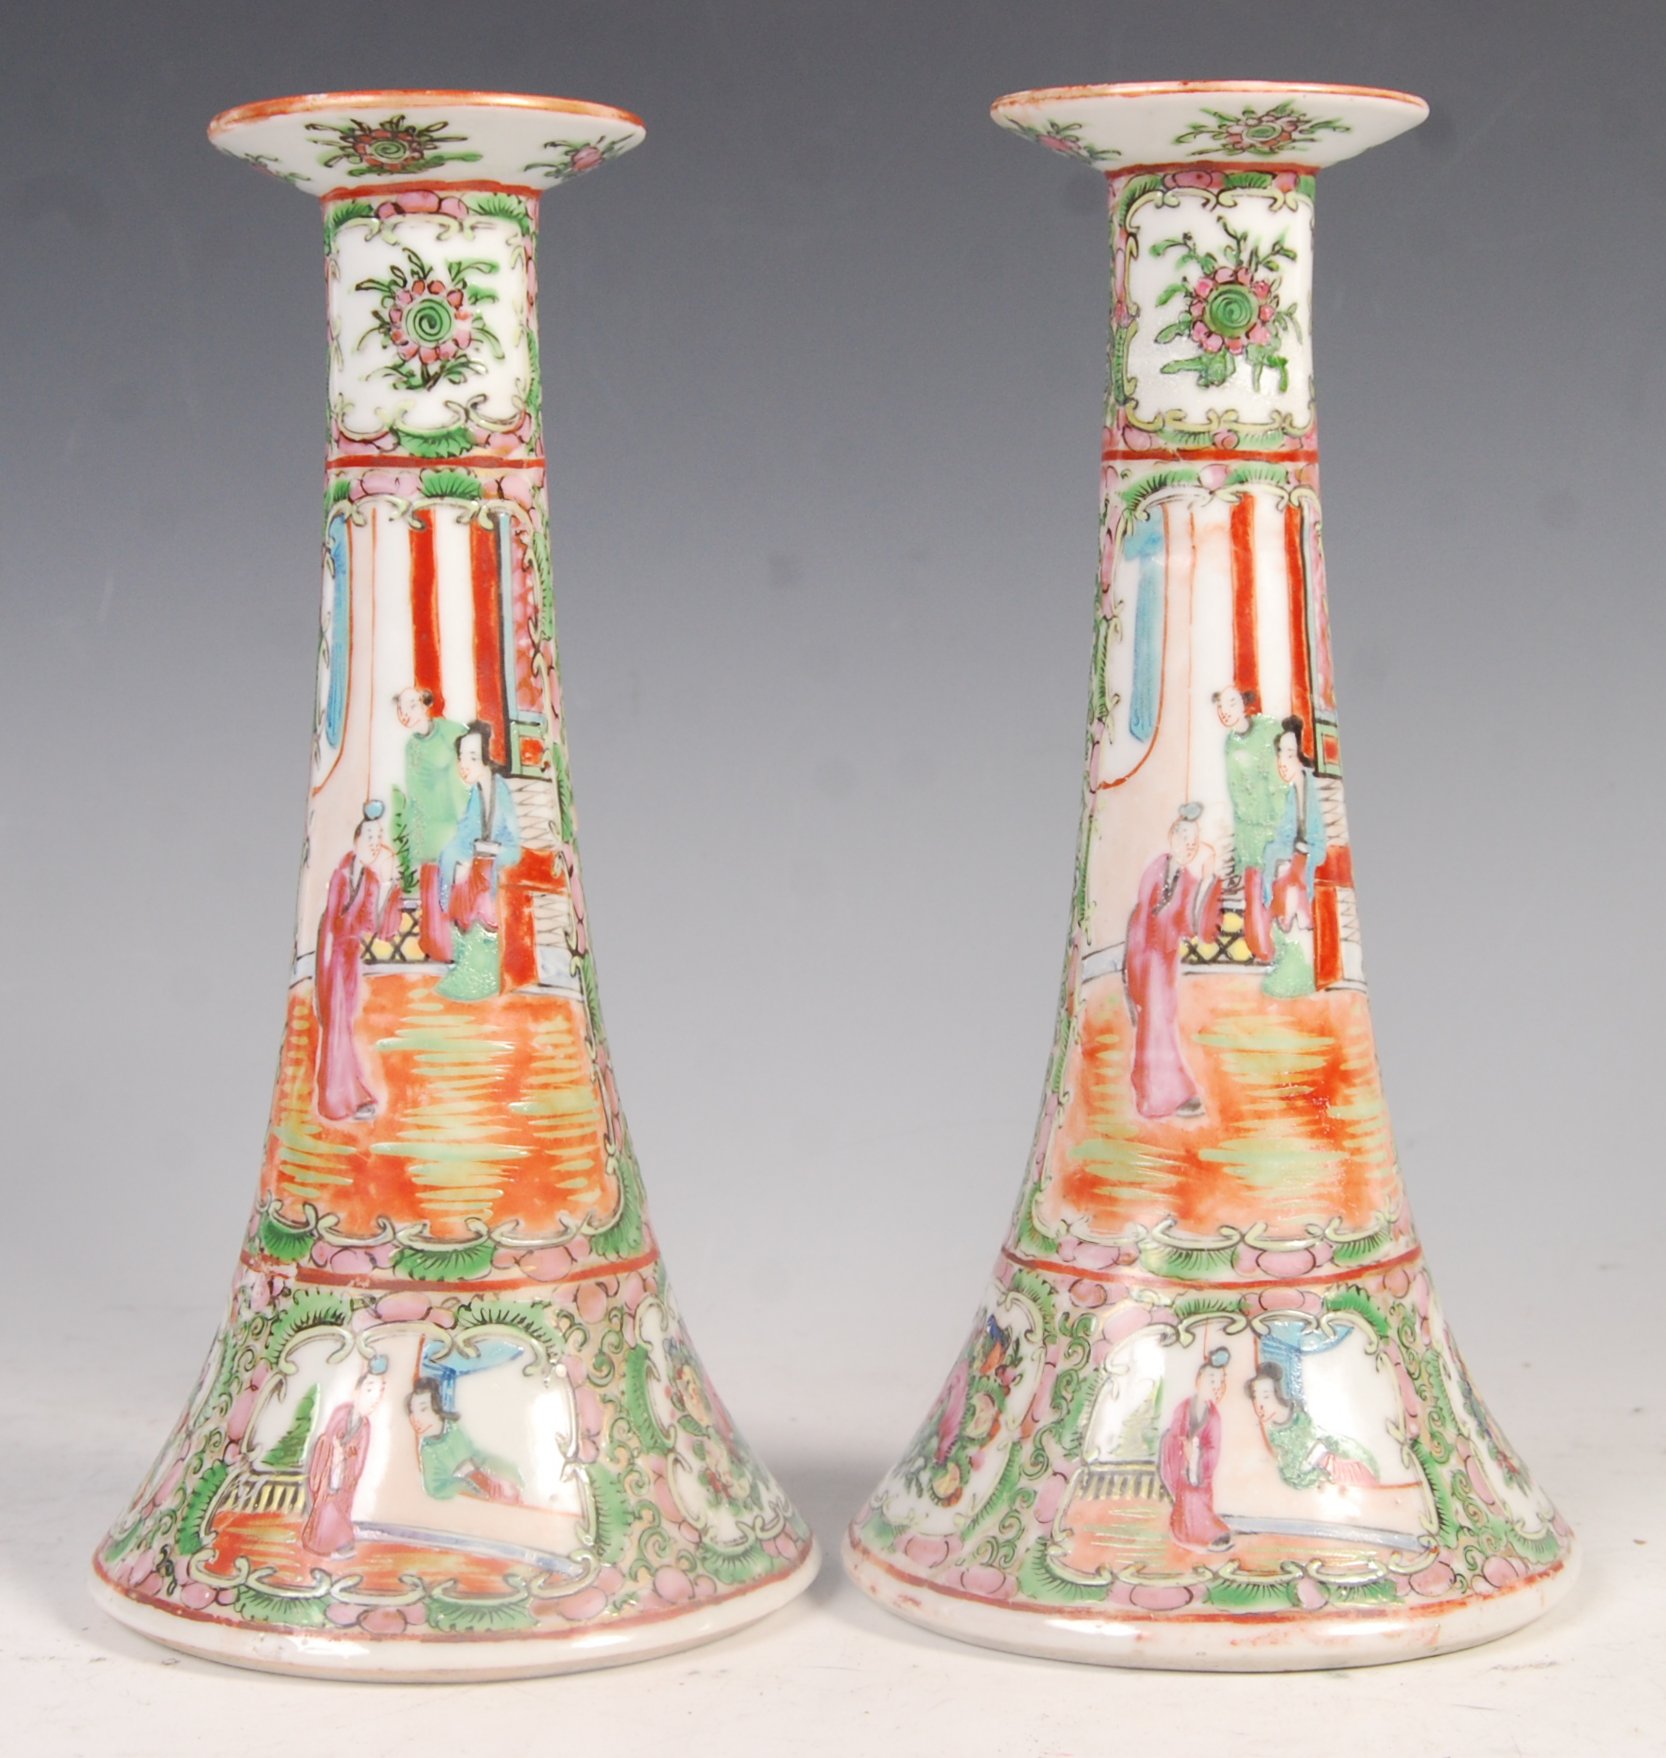 PAIR OF LATE 19TH CENTURY CHINESE CANTON CANDLESTICKS